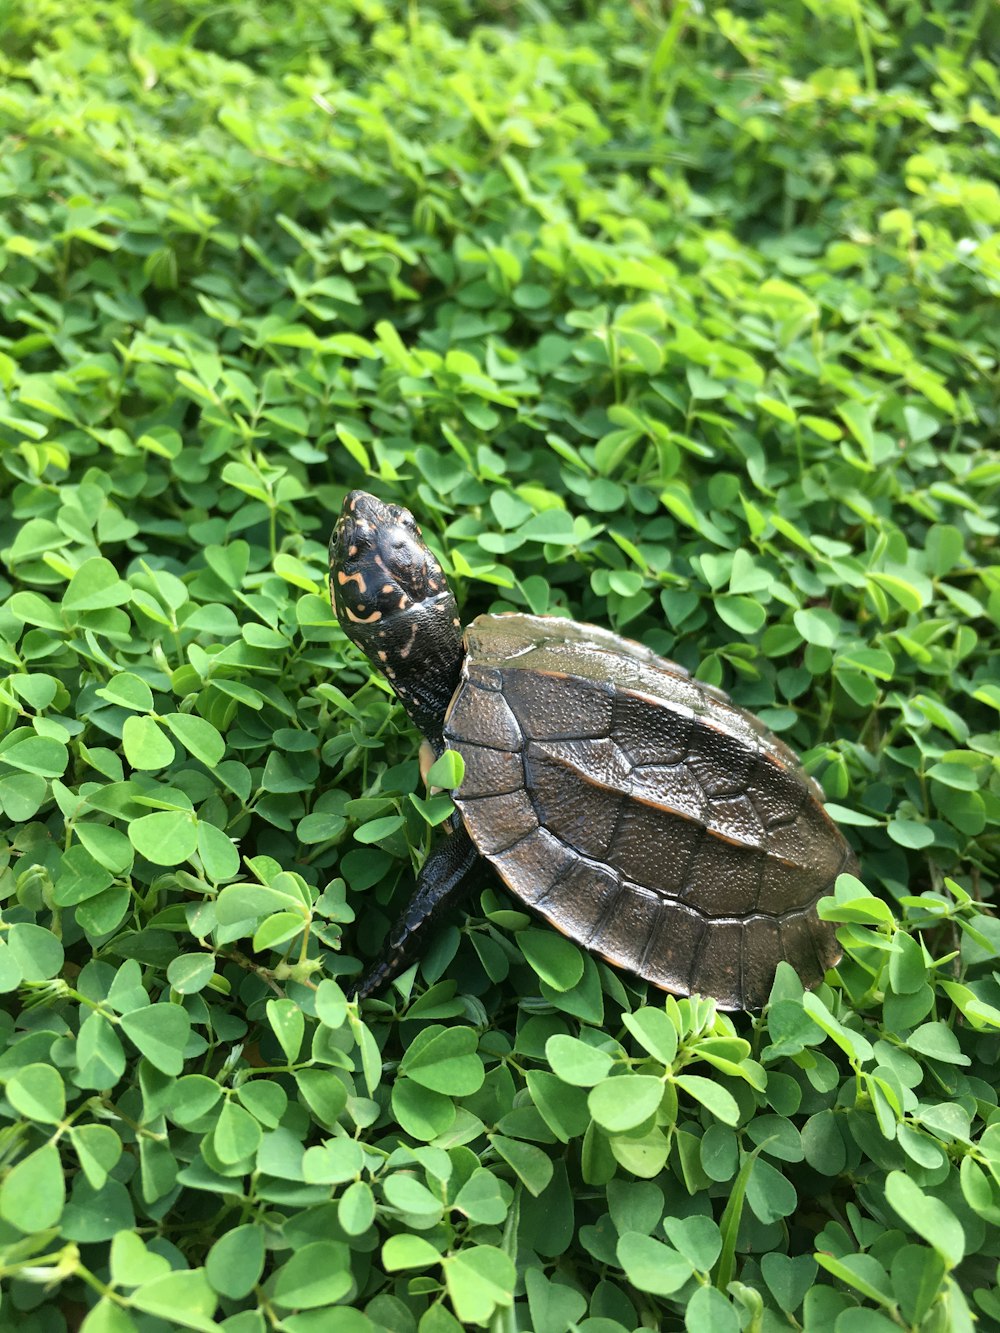 brown turtle on green grass